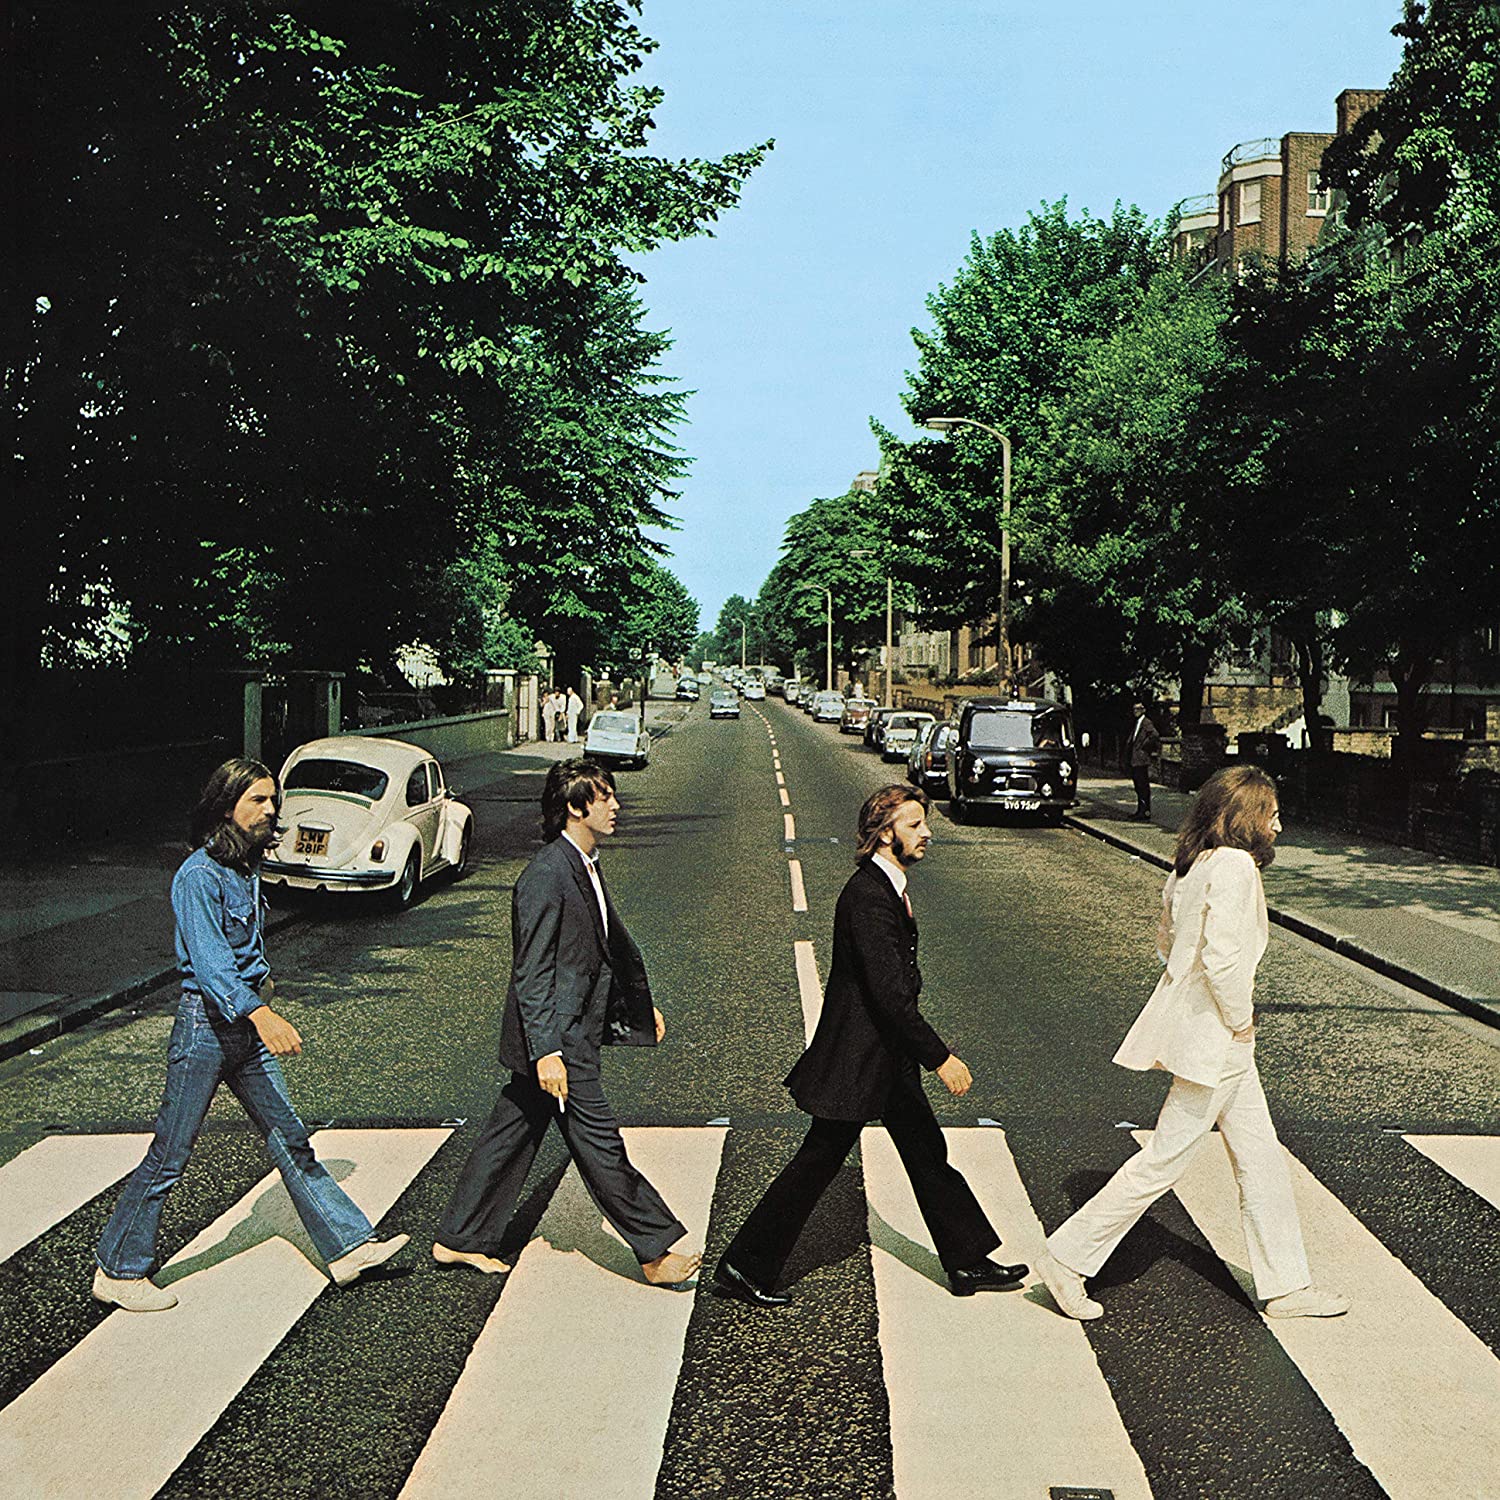 The Beatles- Abbey Road Anniversary Edition 3LP